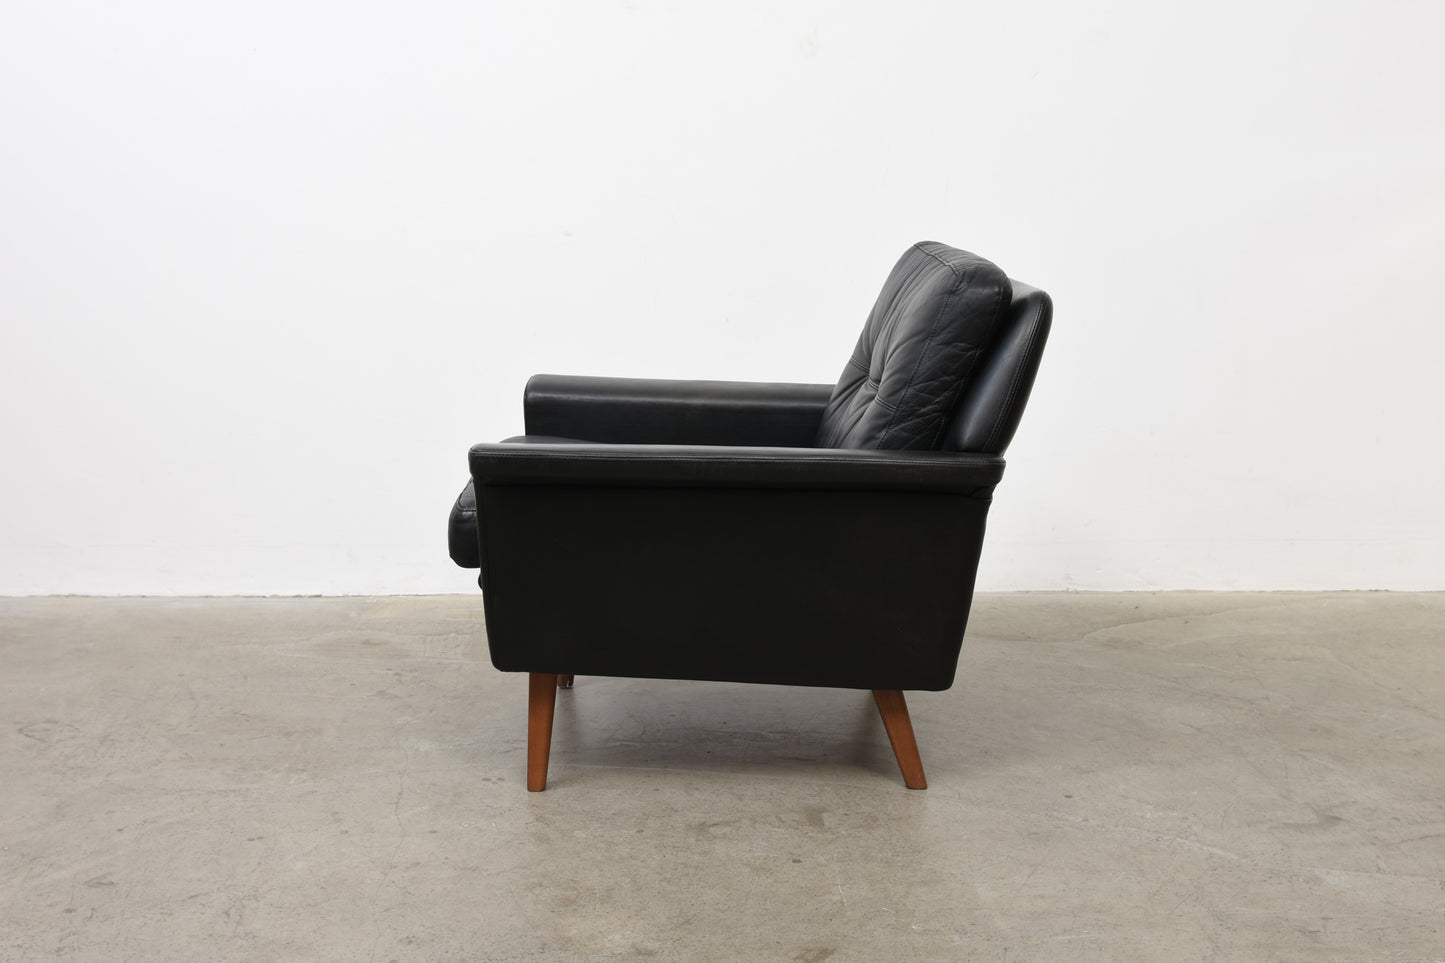 1960s leather lounger by Nili